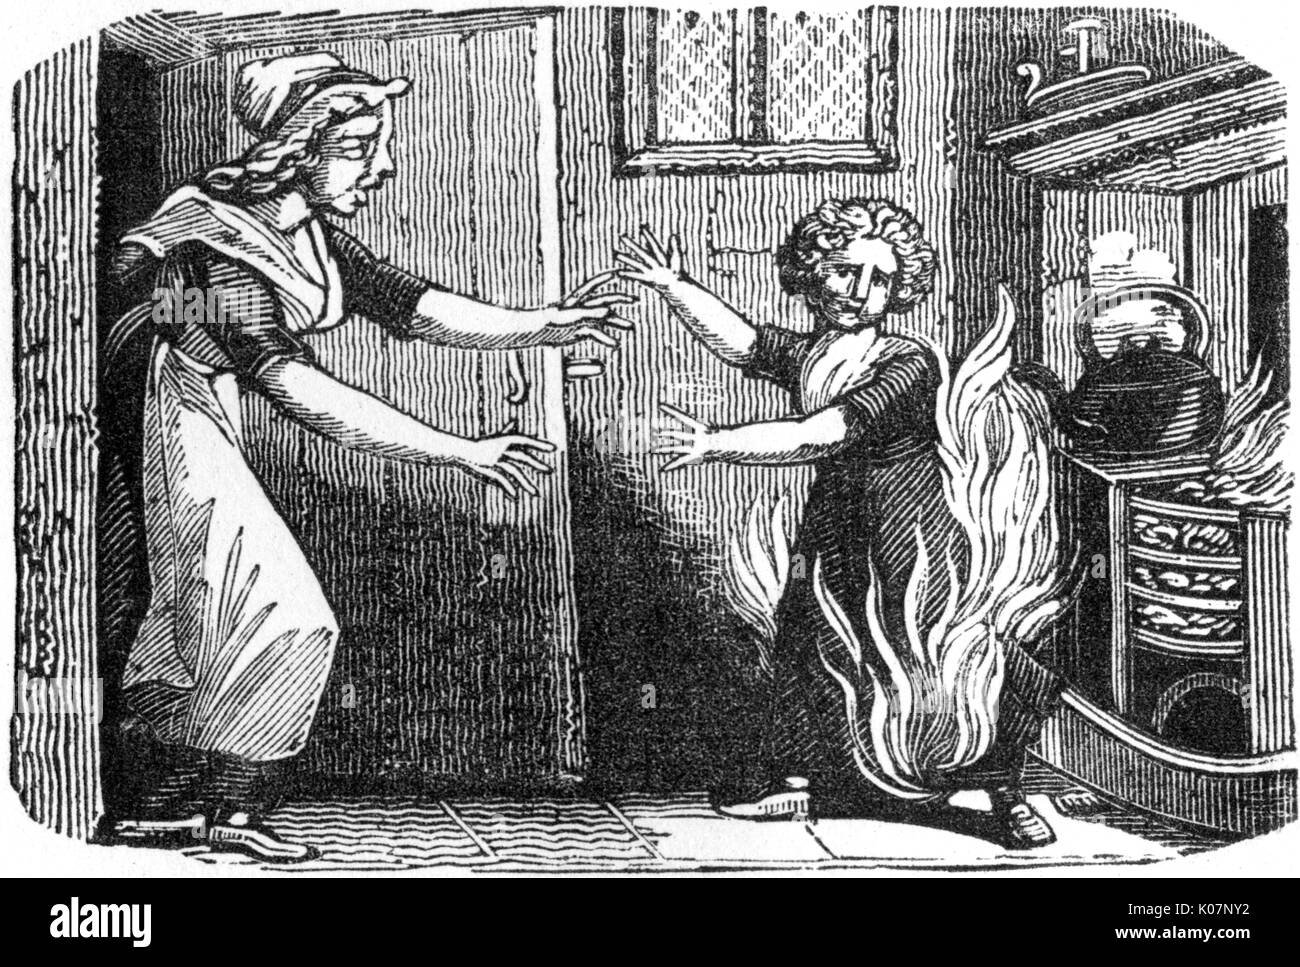 Child who played with fire, c.1800 Stock Photo